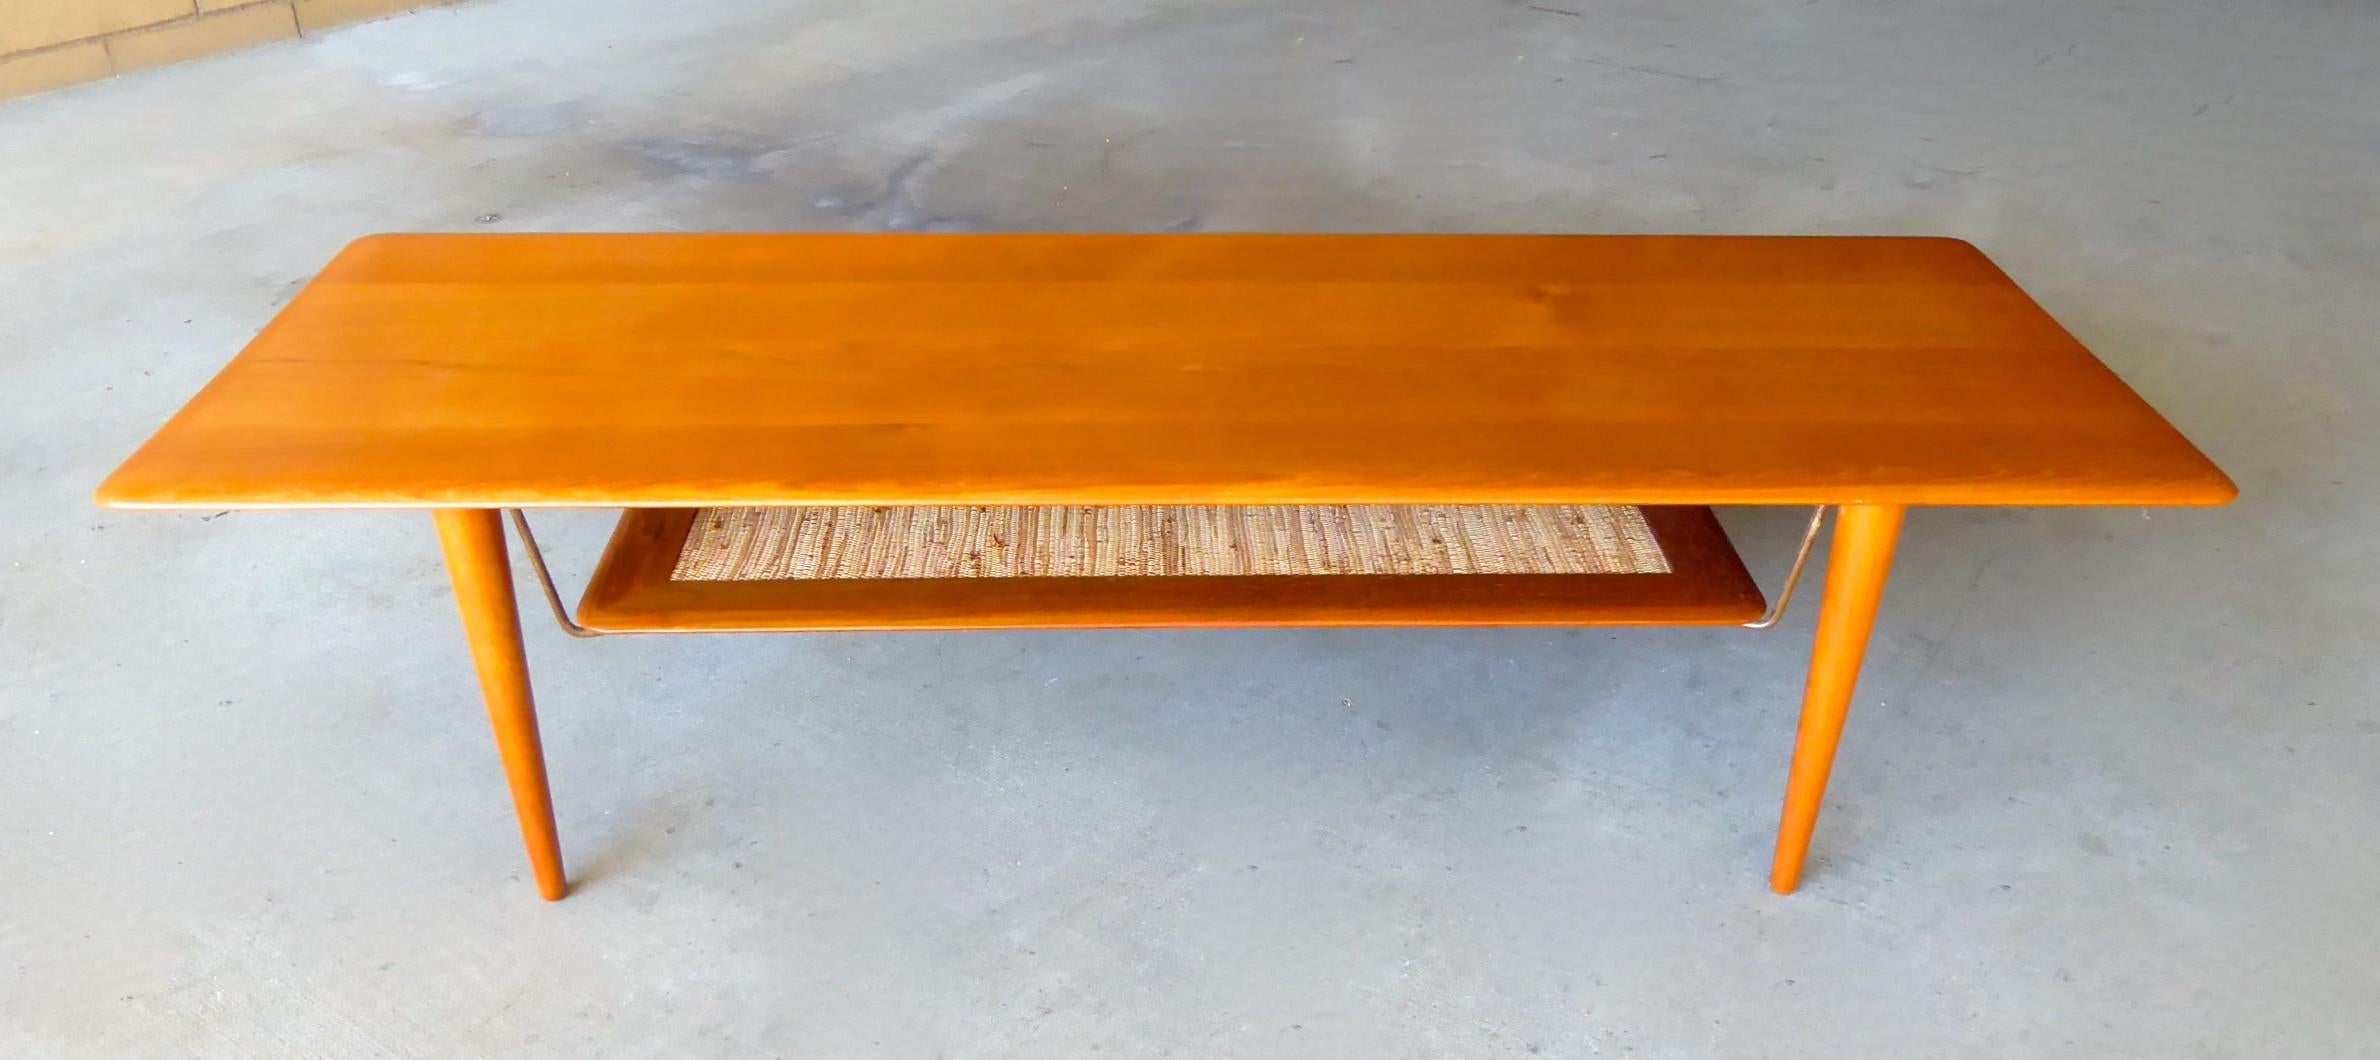 A Danish teakwood coffee table designed by Peter Hvidt and Orla Mølgaard-Nielsen in the 1960s. The coffee table is labeled as manufactured by France & Son and retailed by John Stuart. The lower shelf is supported by metal brackets and hold a shelf